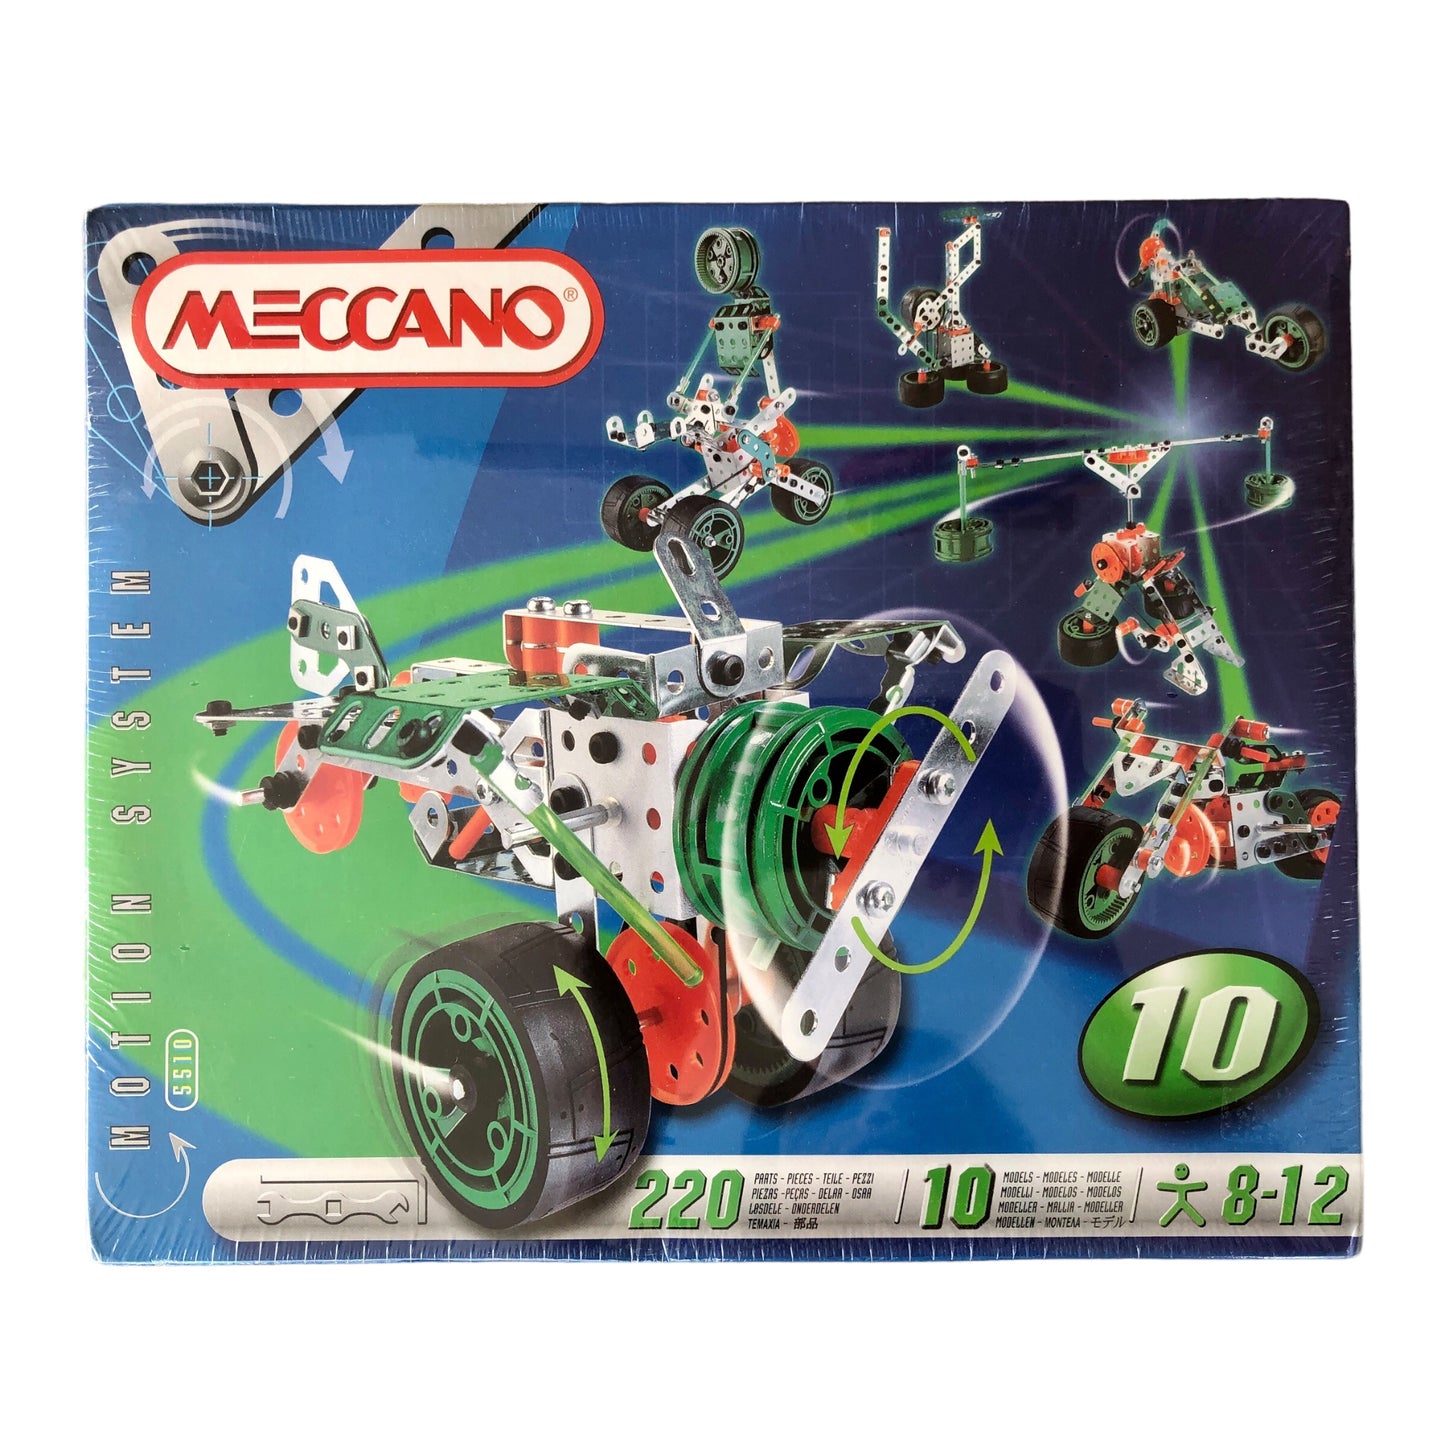 Meccano Motion System 5510 - 220 pieces - 10 models